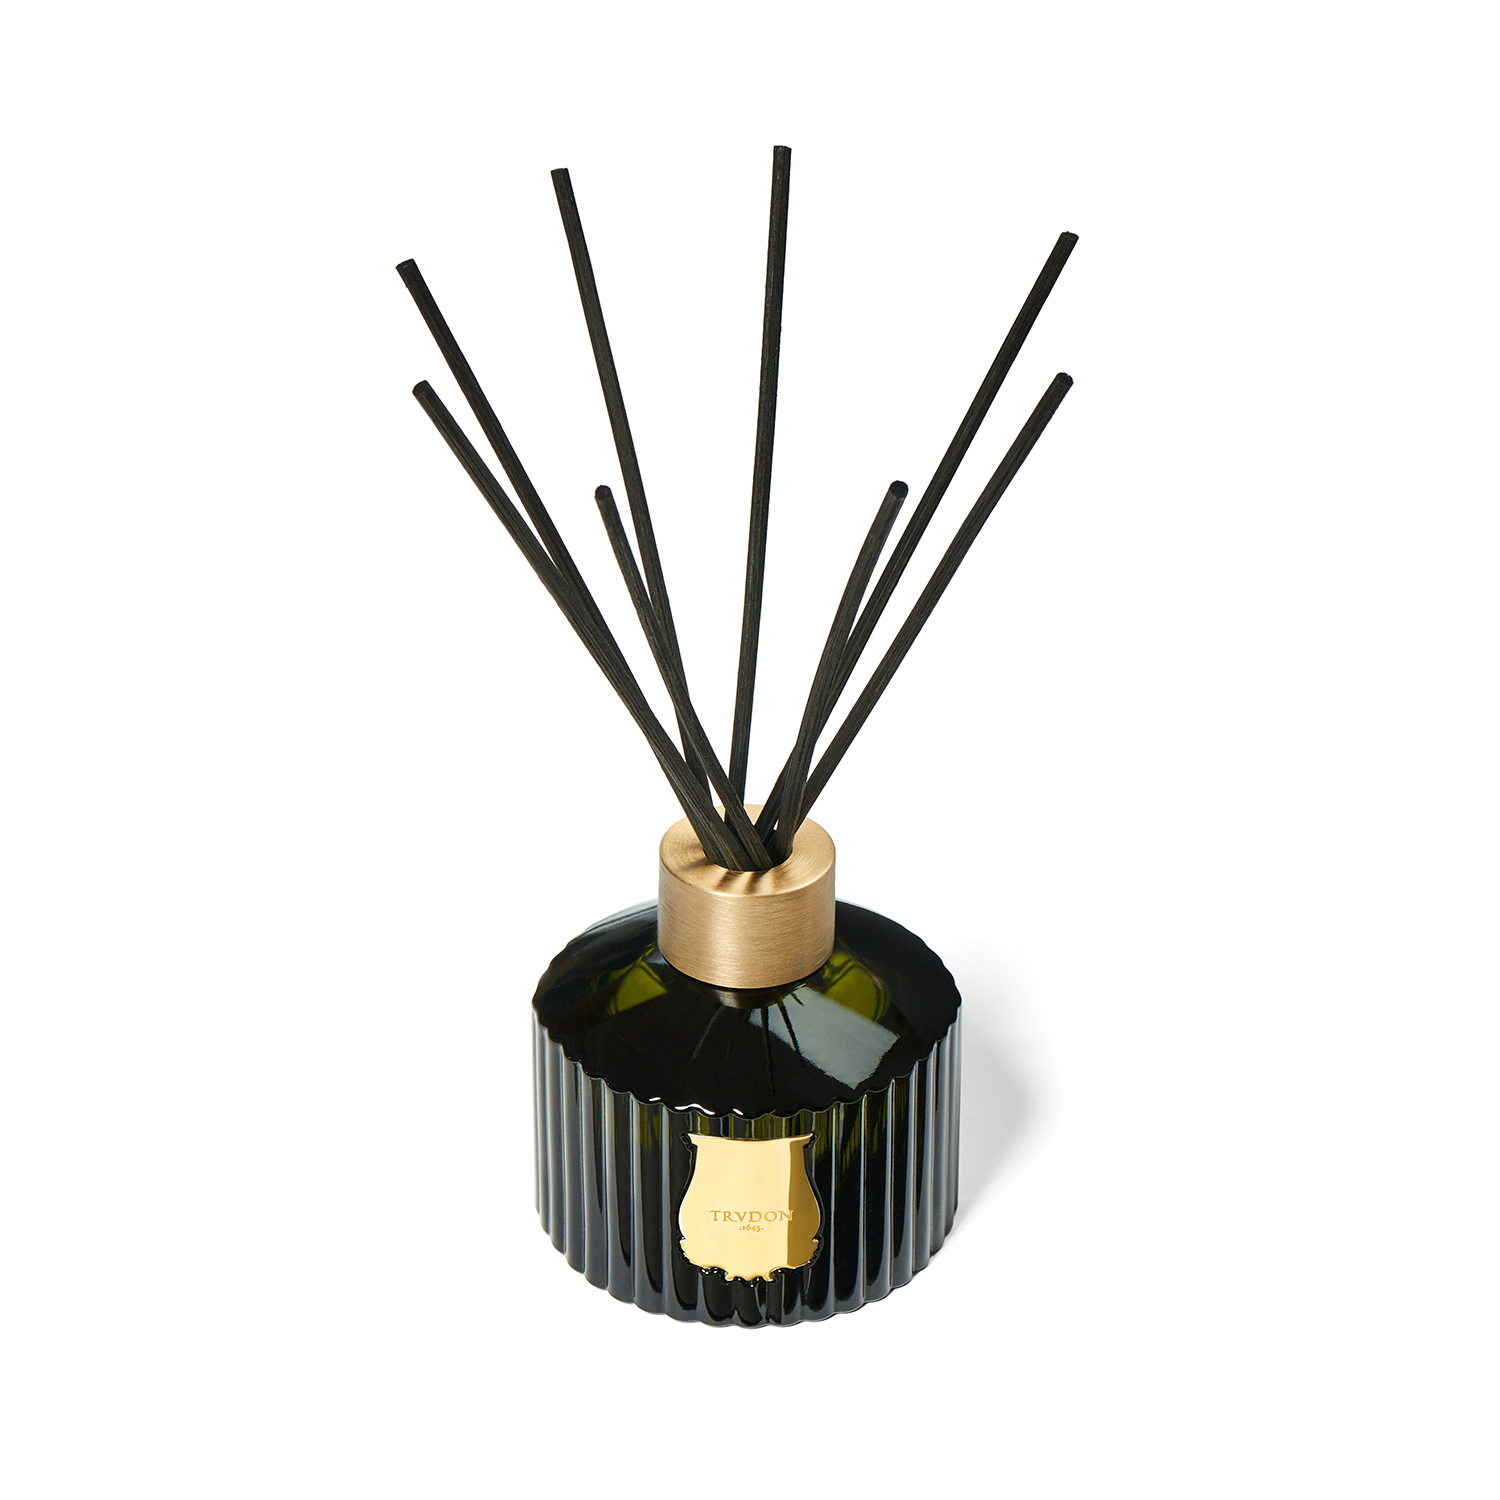 Trudon Reed Diffuser with Green Glass Vessel and Black Reeds